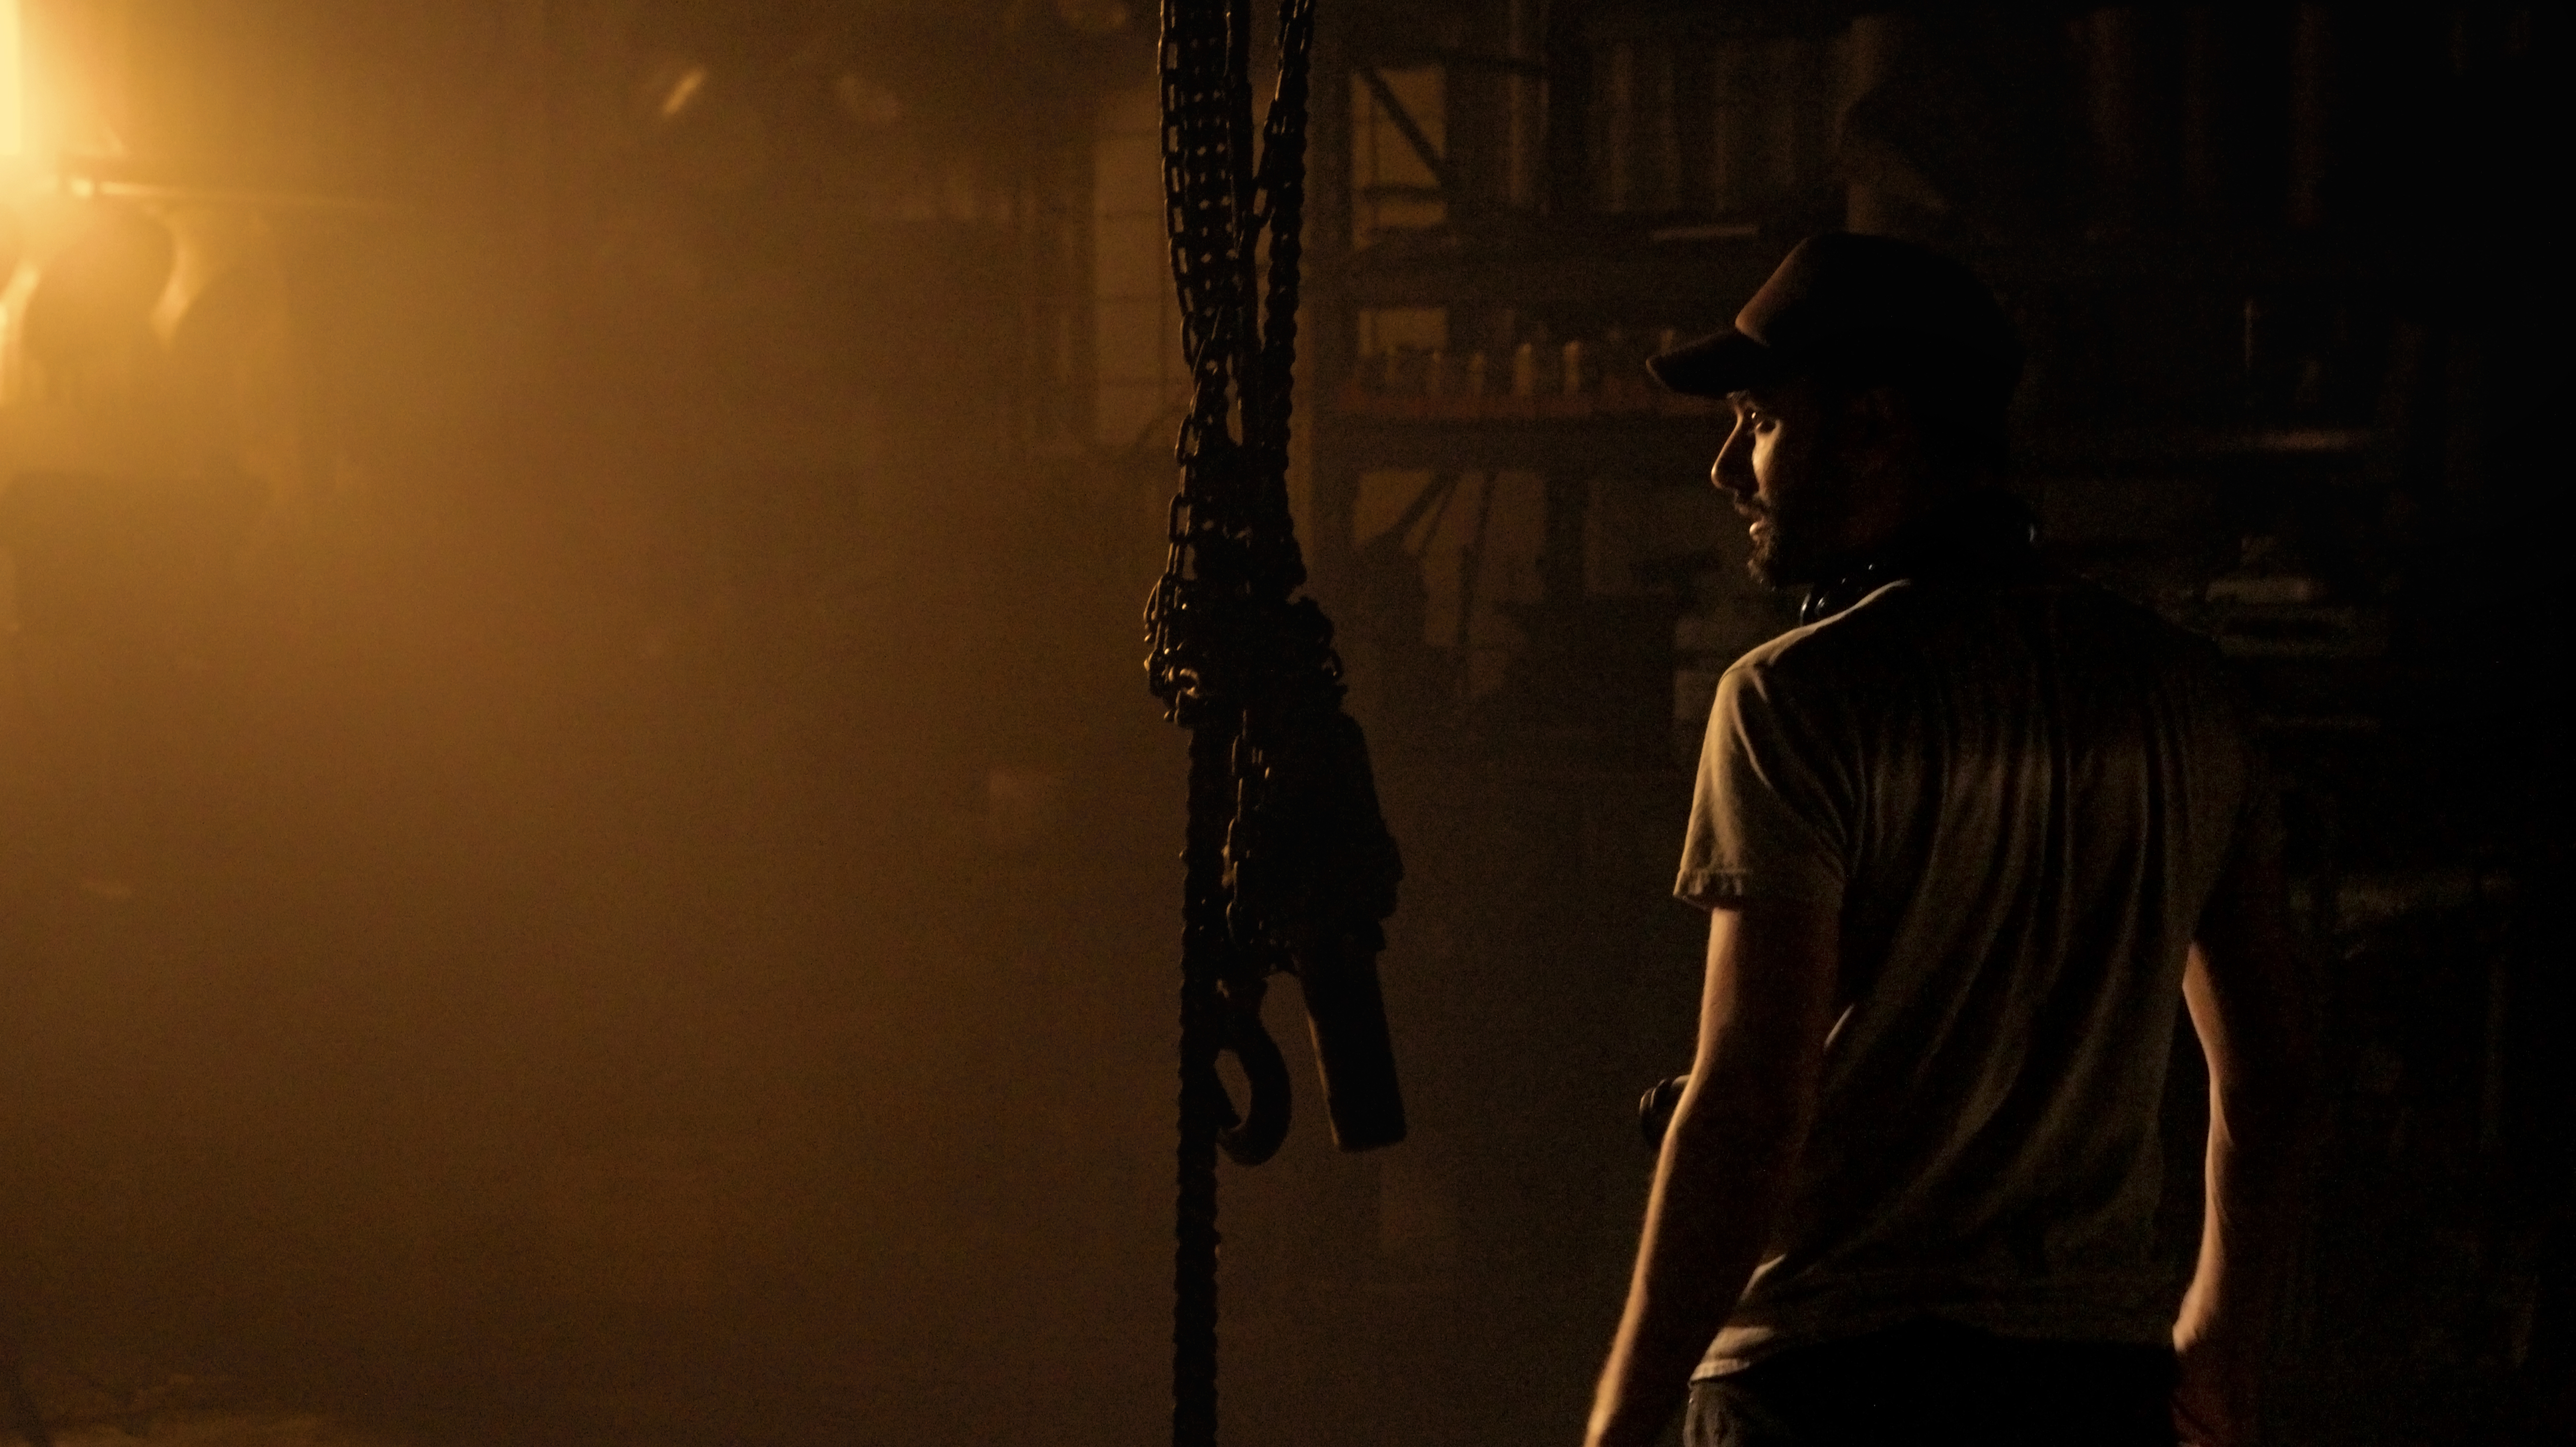 Marc Furmie on the set of Terminus. 2013.